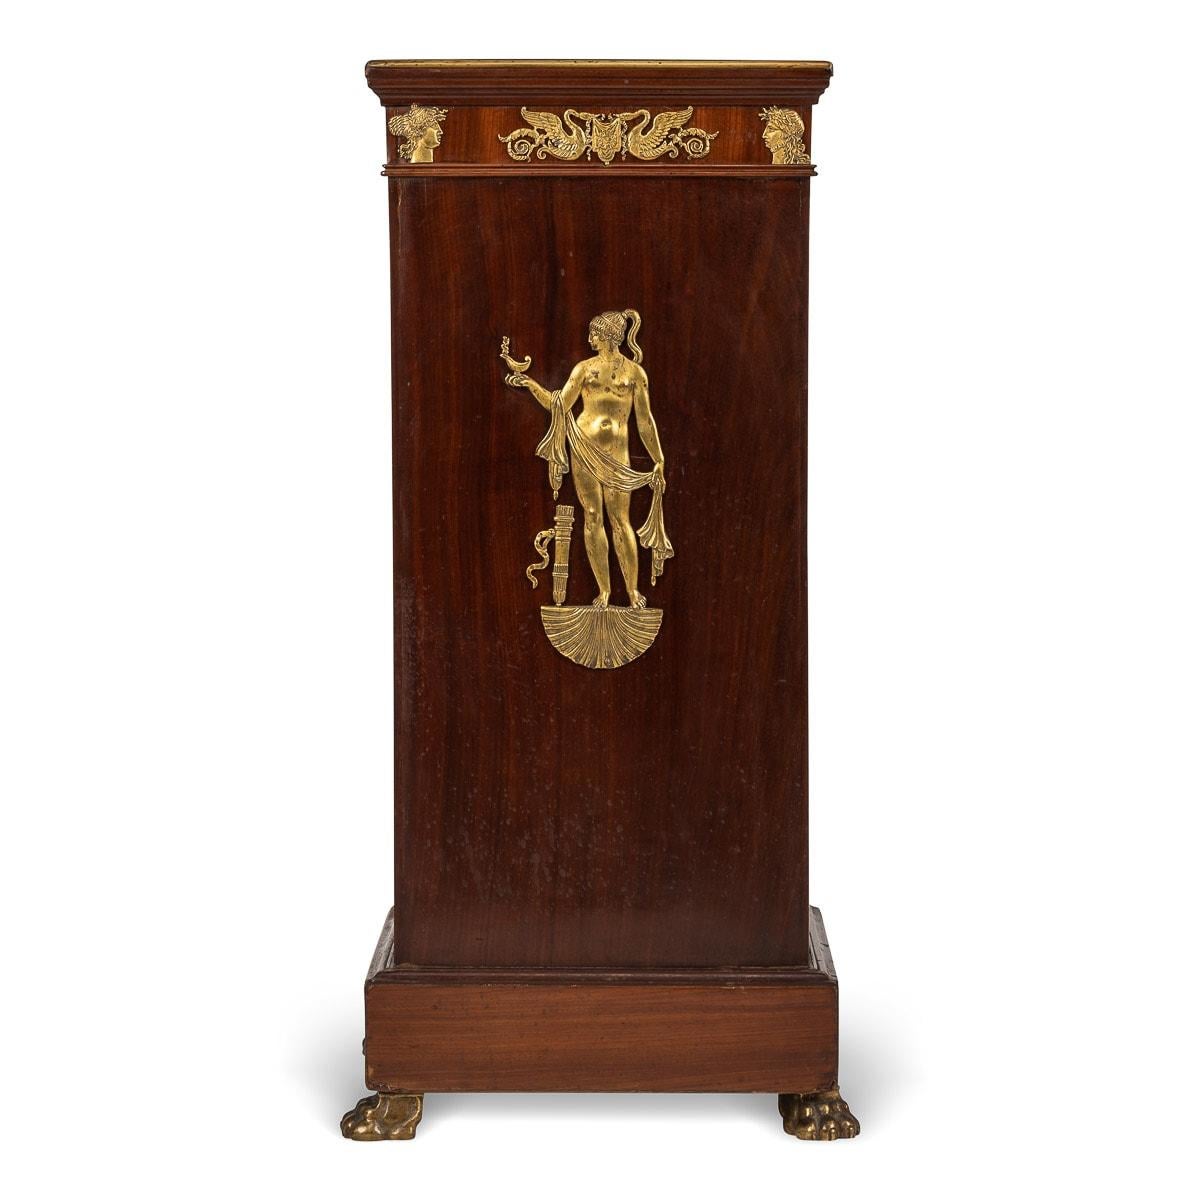 Antique late 19th century French ormolu mounted Empire-style pedestal, cast and figurine depicting a Greek goddess along with sculpted heads overlaid with flora. The middle design depicting a pair of swans holding a suspended tapestry with garlands